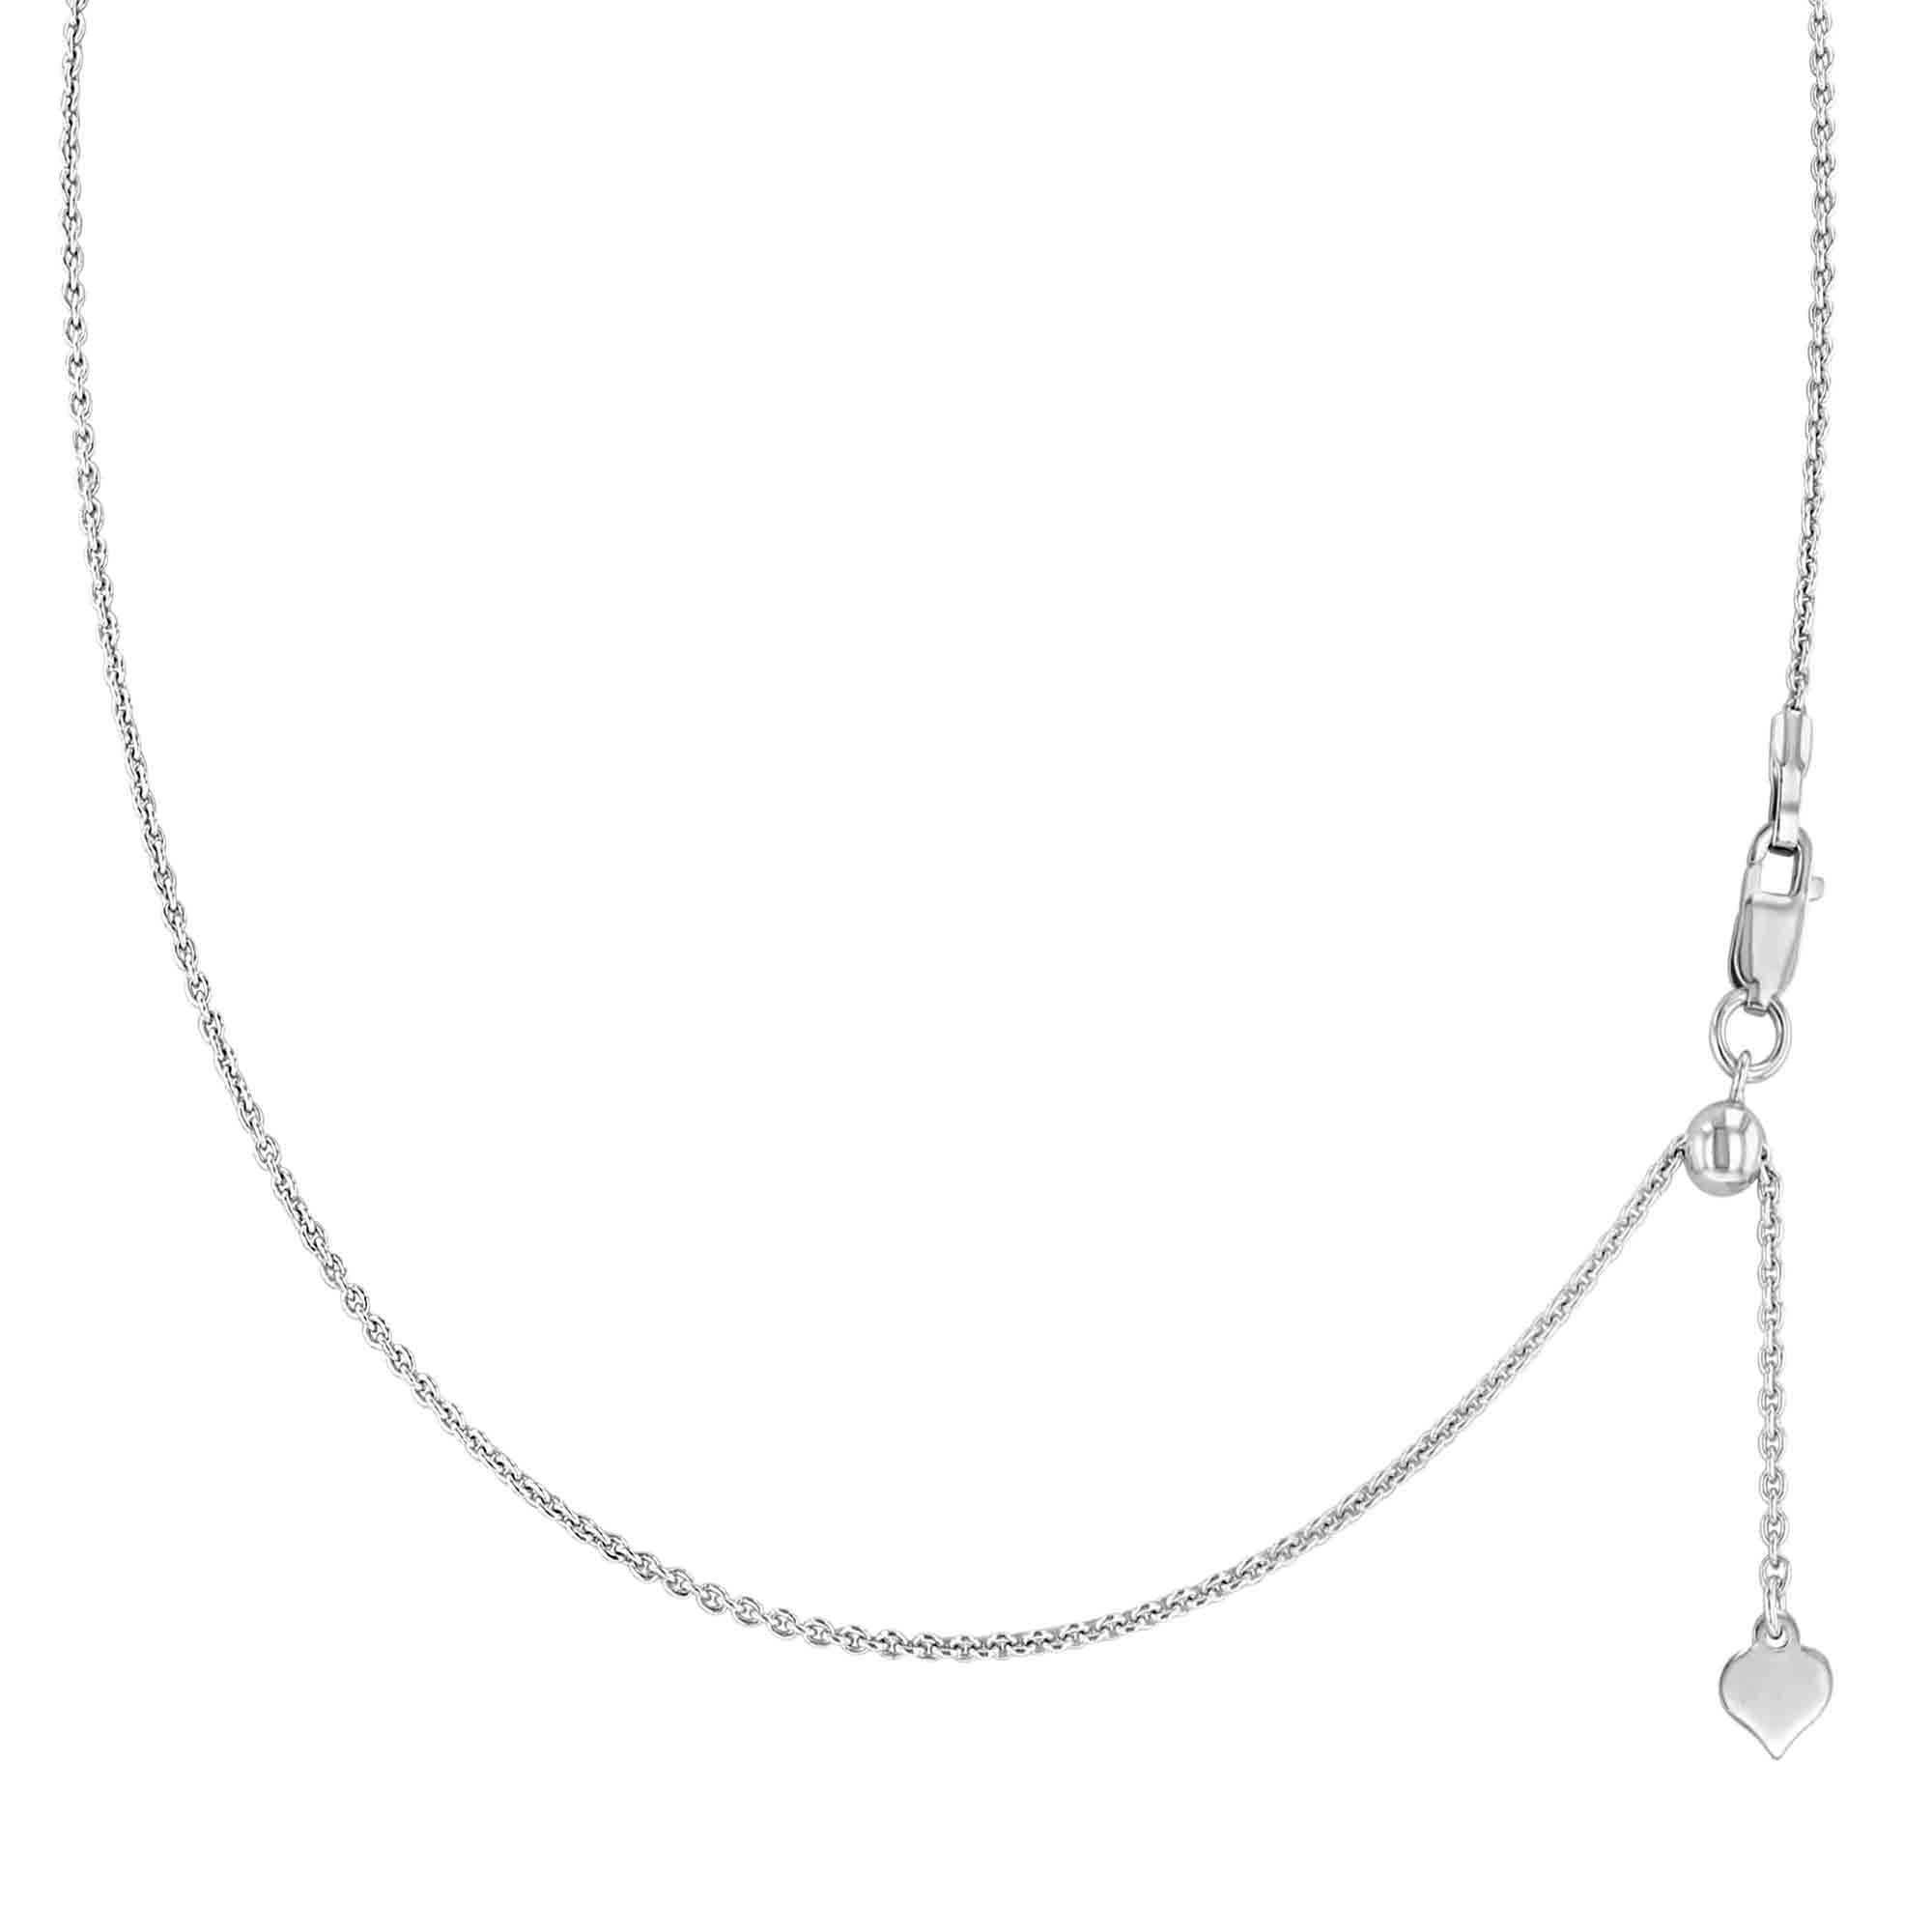 Women's Clear Swarovski Crystal Adjustable Chain Necklace - Clear/gray  (30